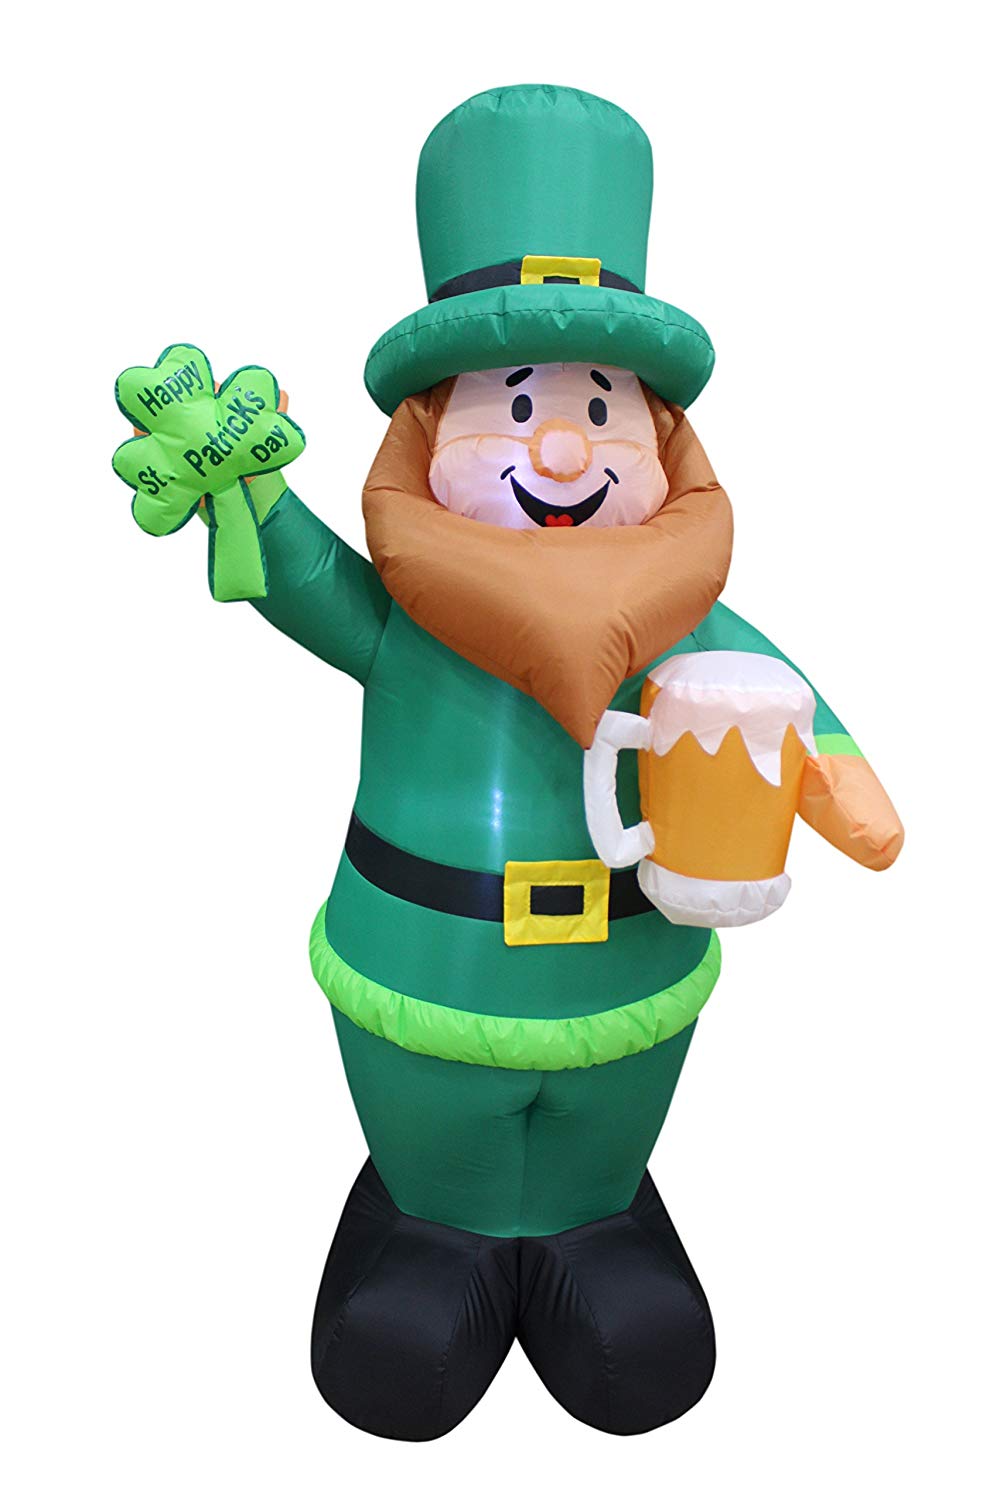 inslife 6Ft Inflatable St Patrick's Day Leprechaun in Bear Drunk Cup Lighted Up Decoration for Indoor and Outdoor 